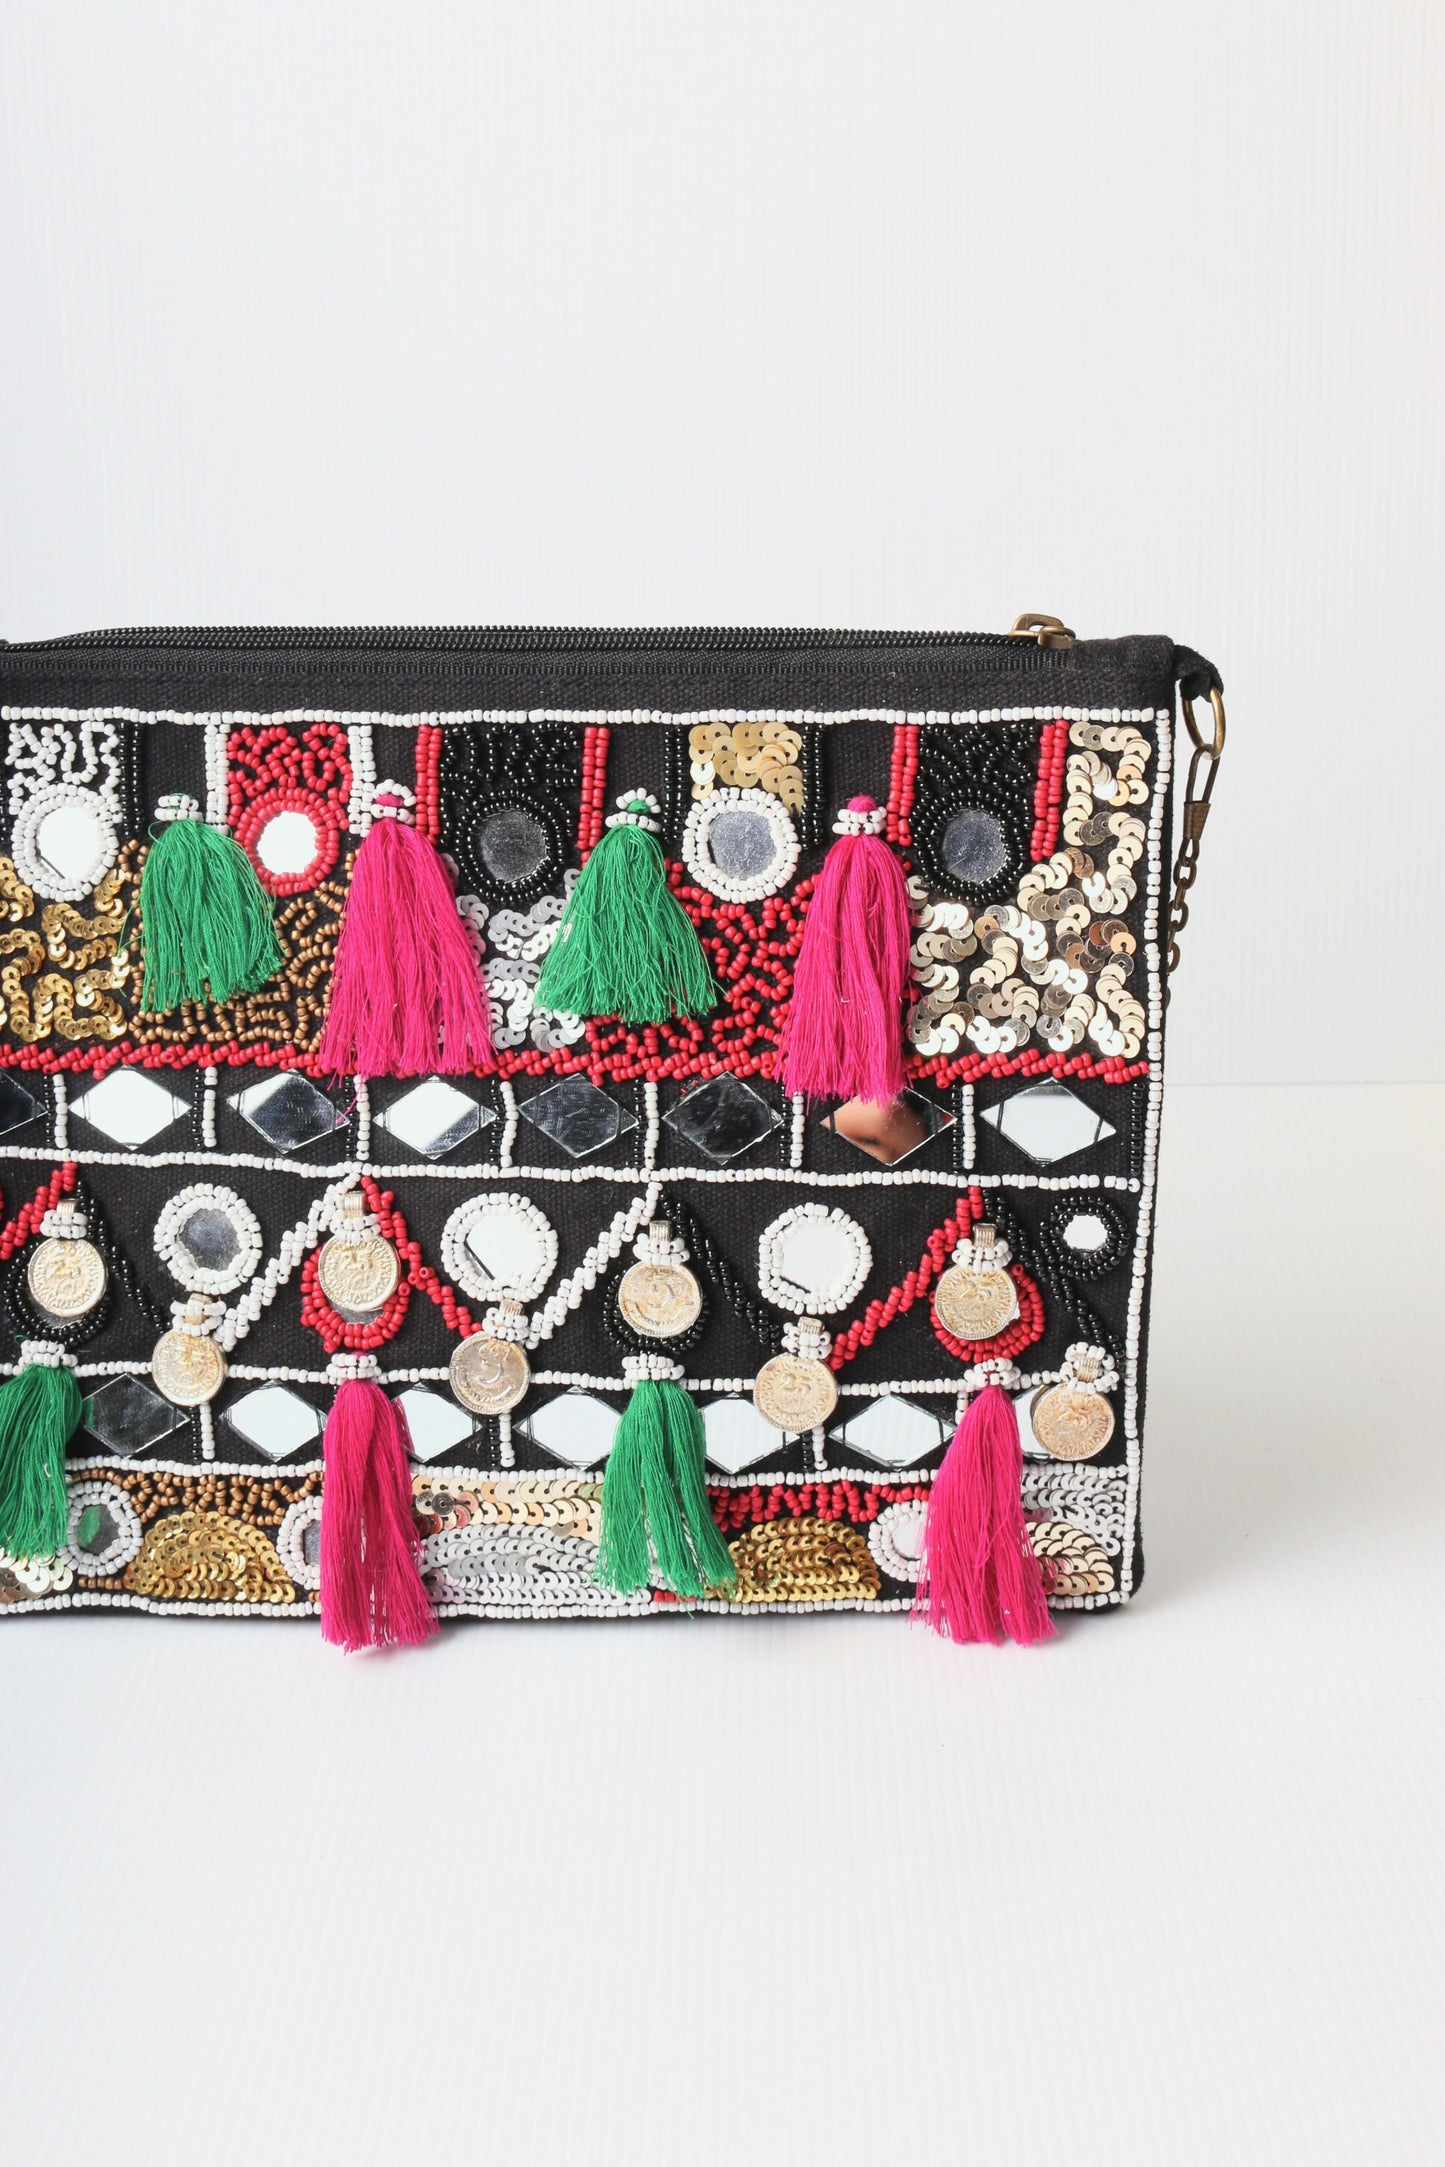 Persia Bag- tassle, beading and mirror embellished bag with black 100% suede leather body.